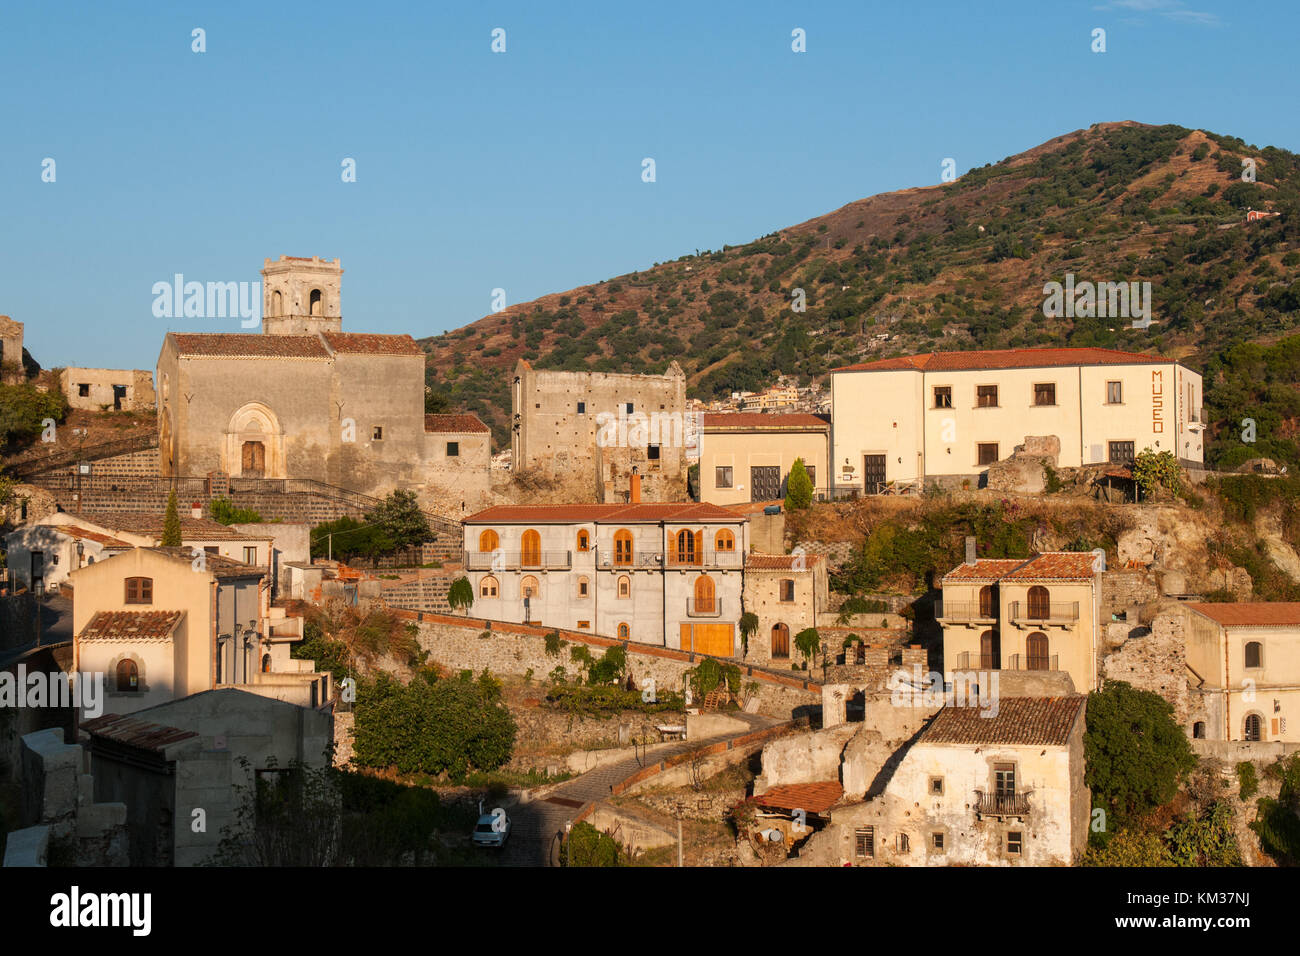 A View Of The Village Of Savoca Sicily Italy The Town Was The